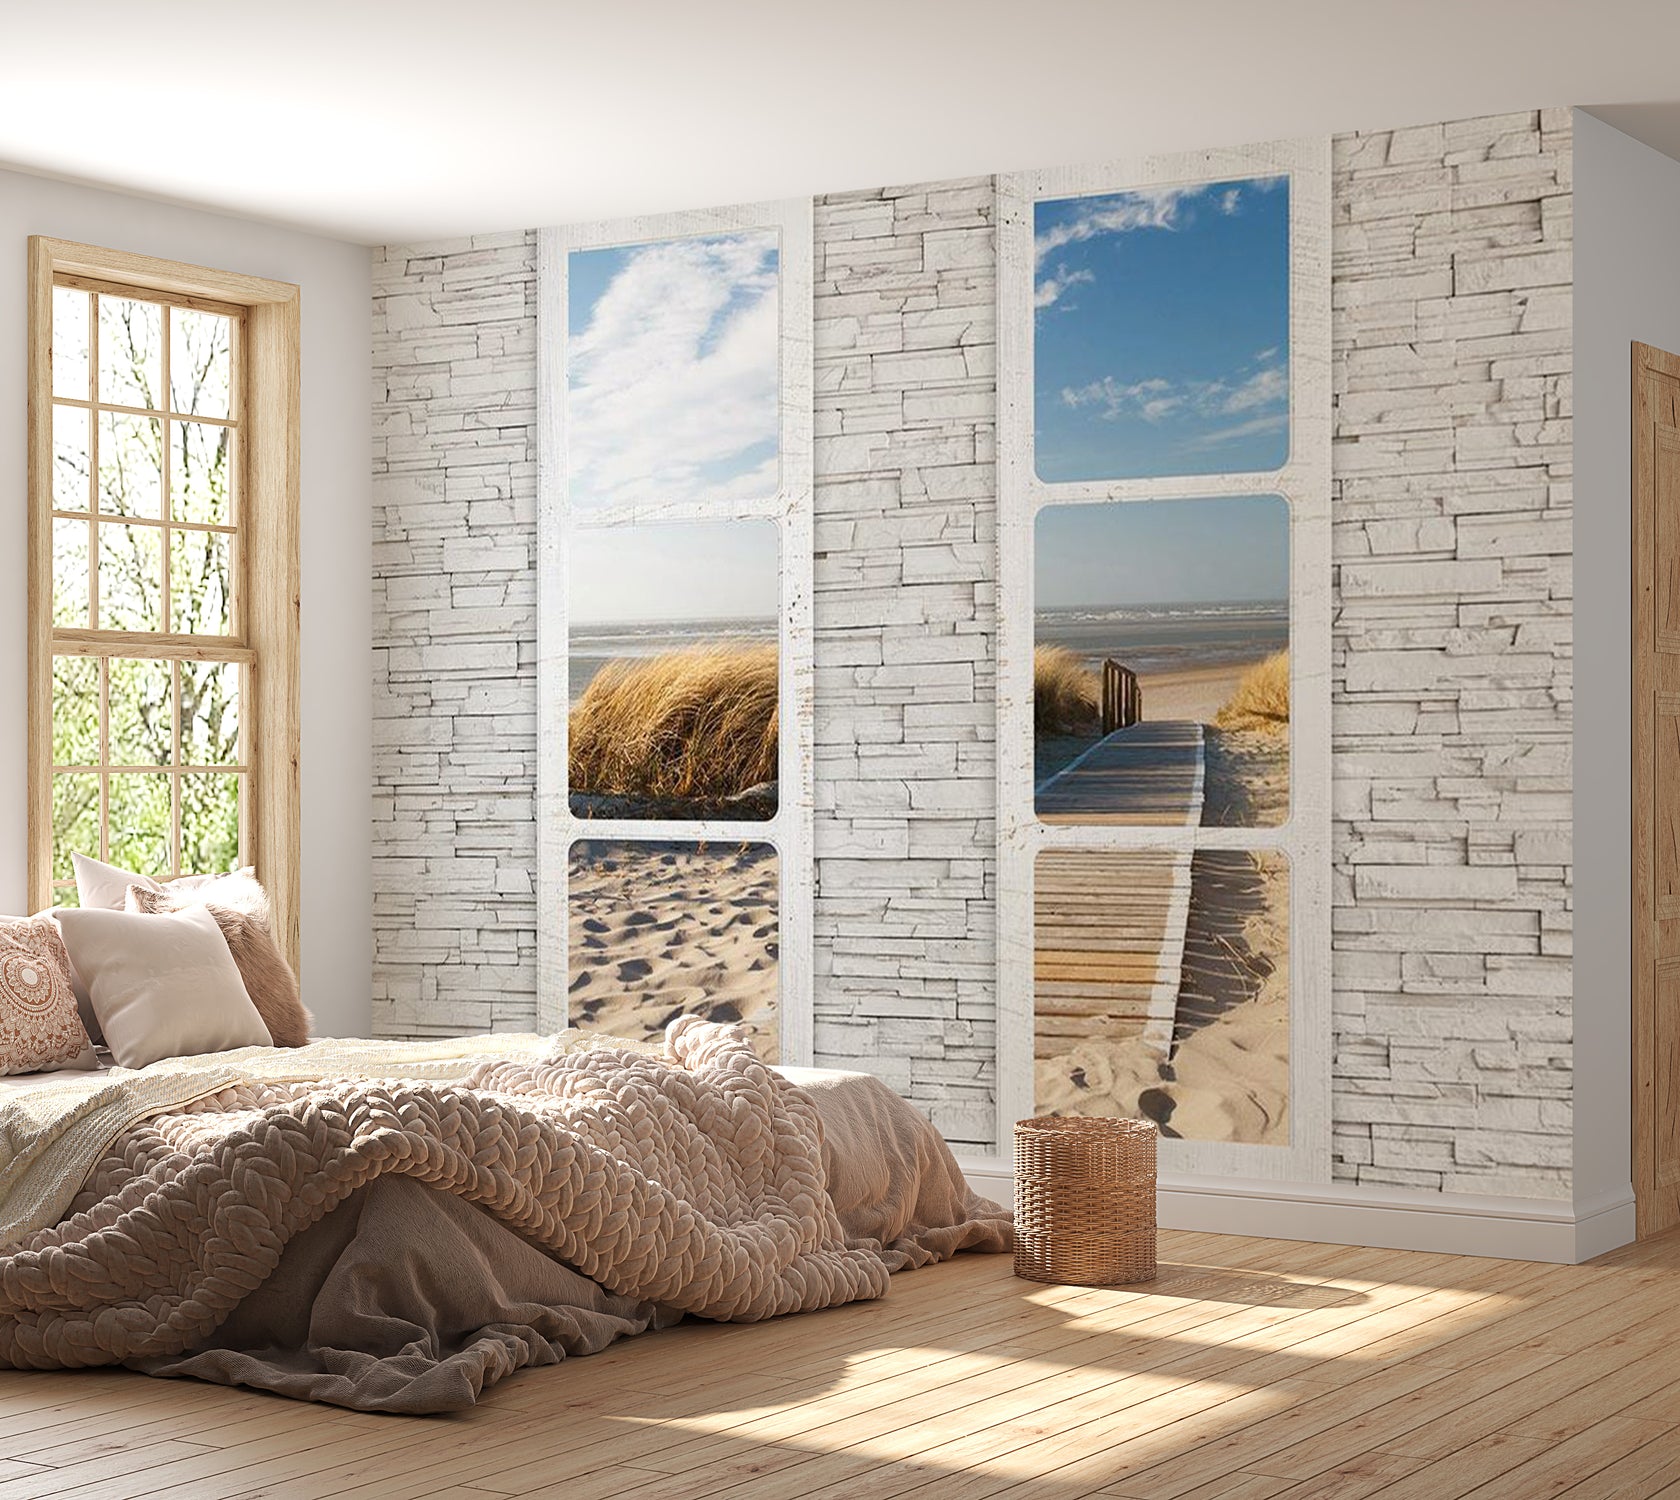 Peel & Stick Beach Wall Mural - Beach View From Window - Removable Wall Decals